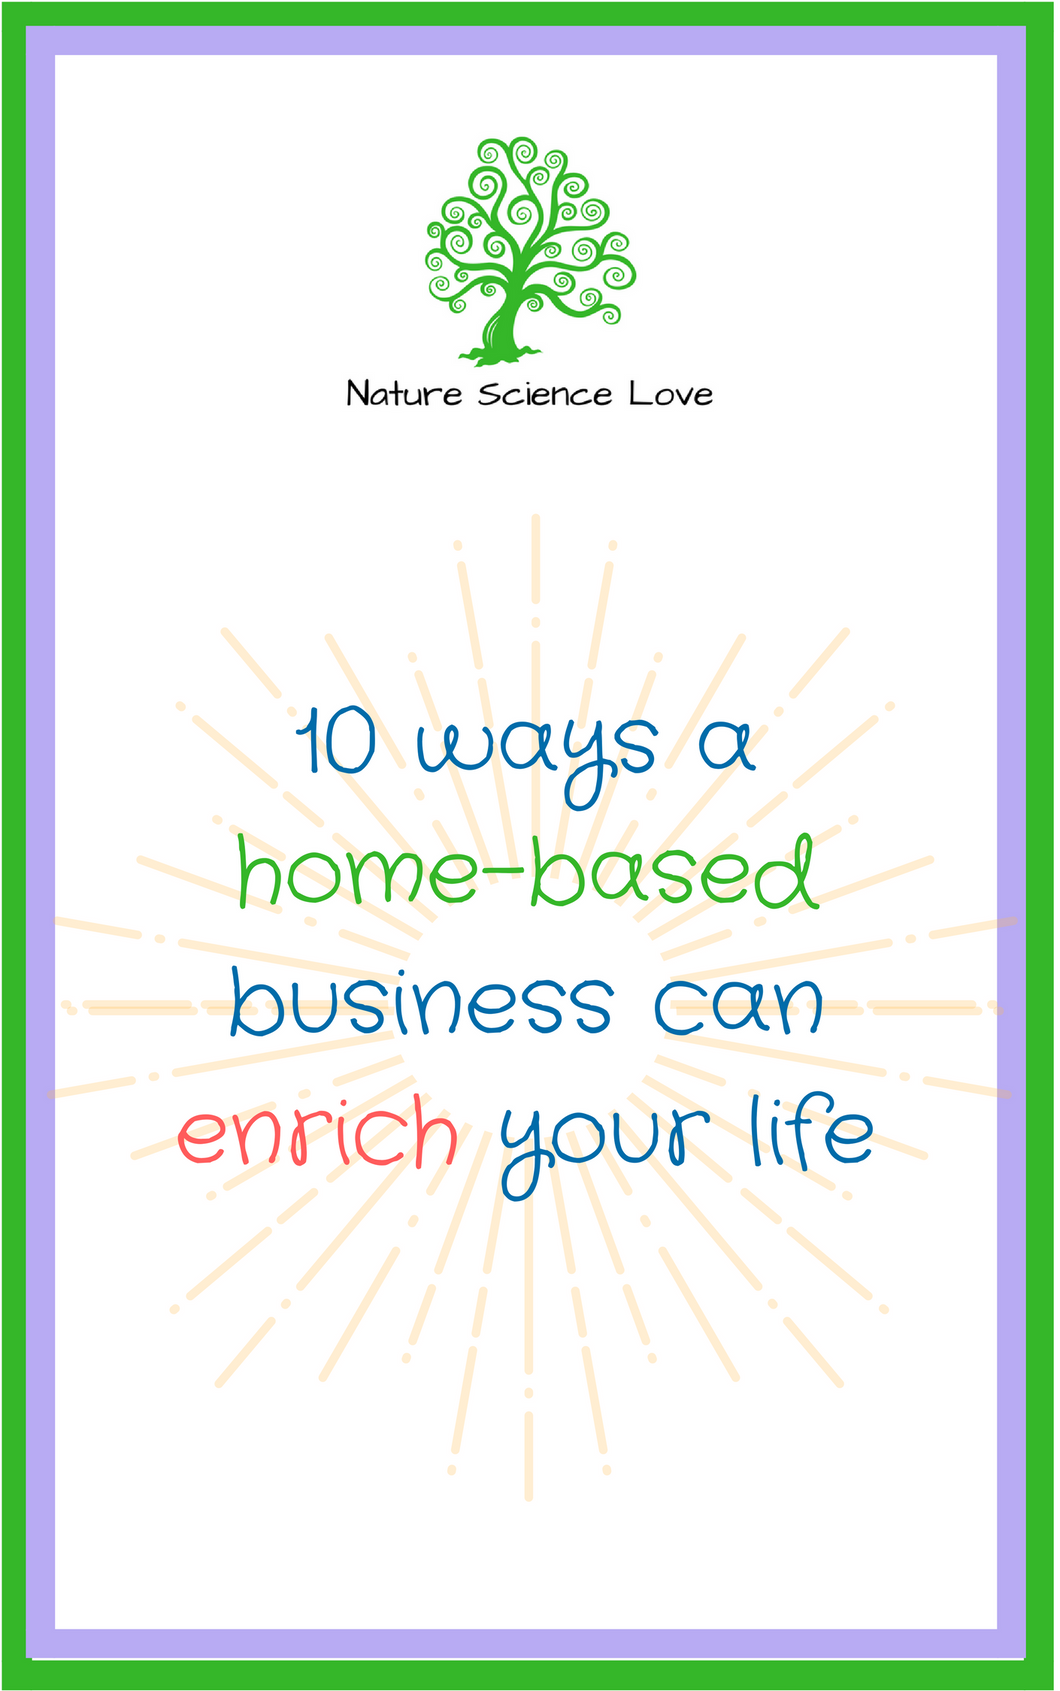 FREE Guide: 10 ways a home-based business can enrich your life (E-book)